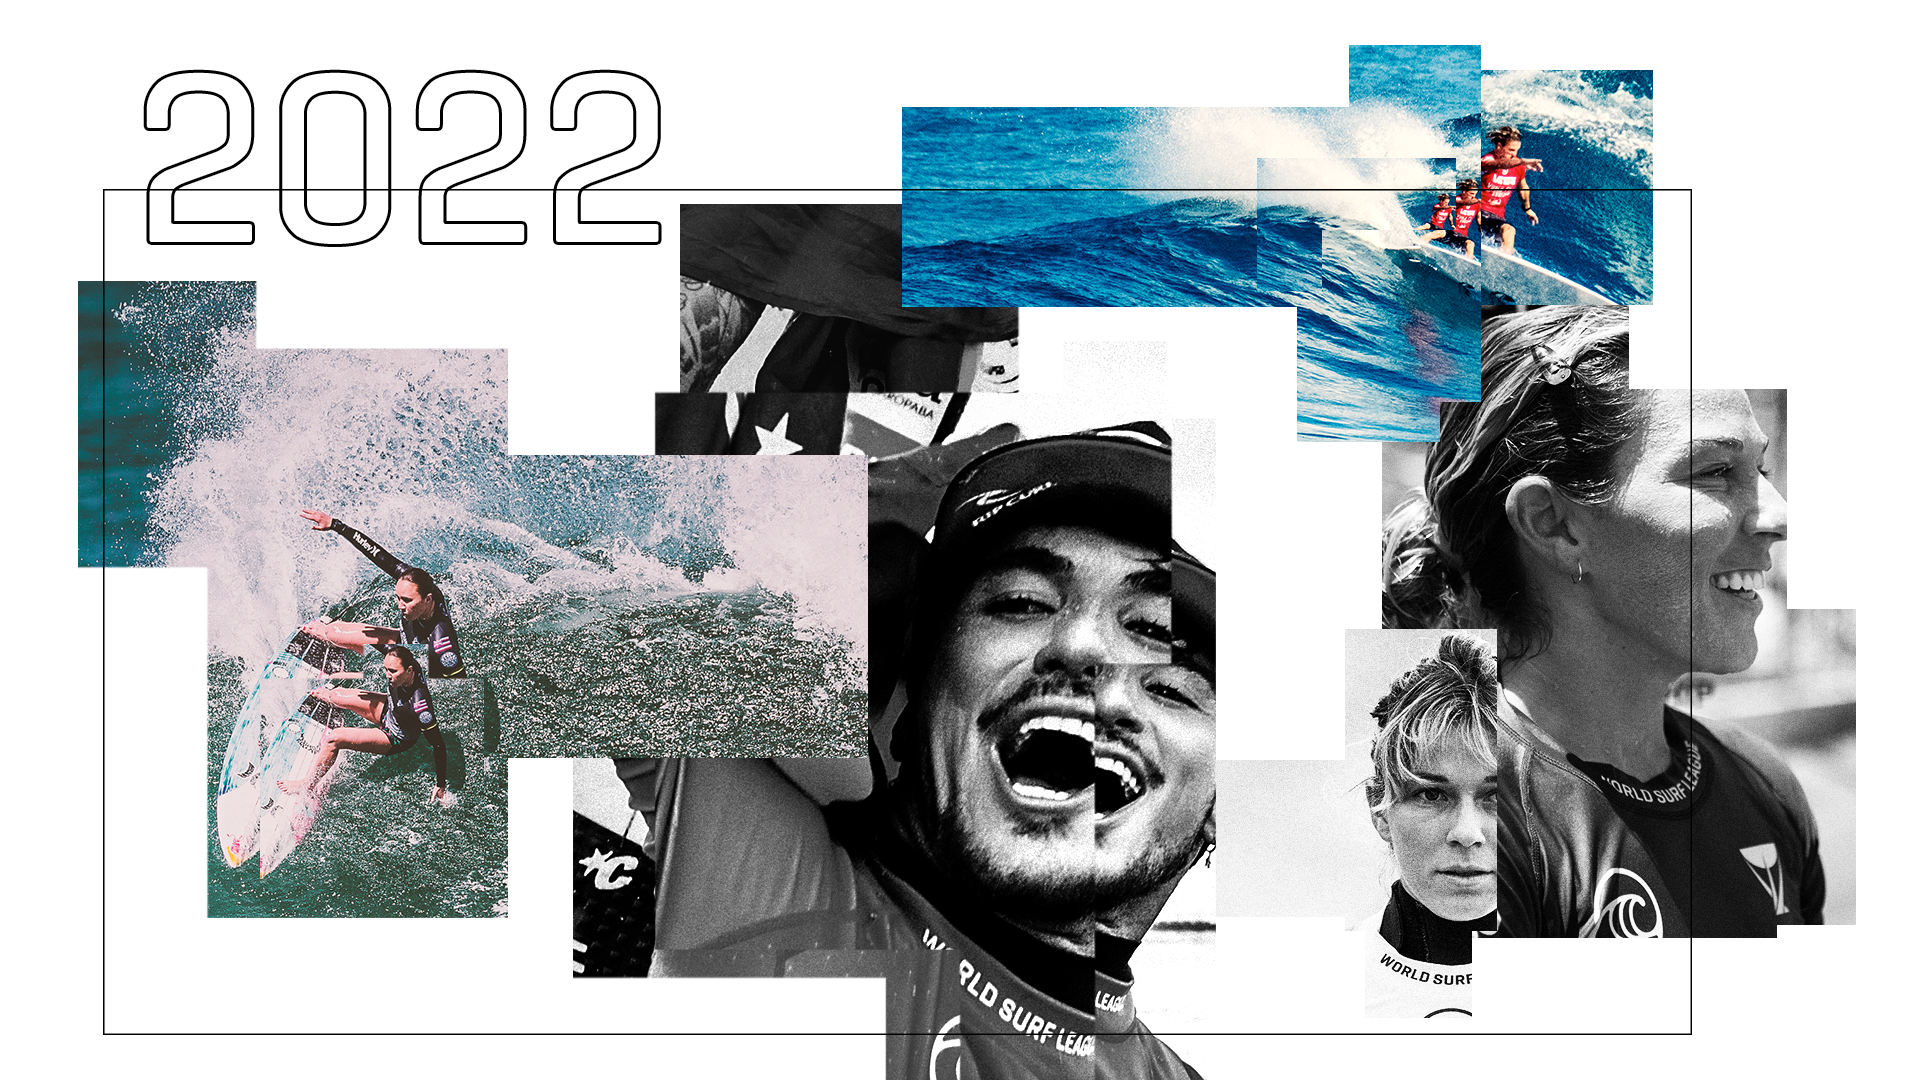 The 2022 World Surf League (WSL) Tour Calendar. Redesigned and Reformatted.